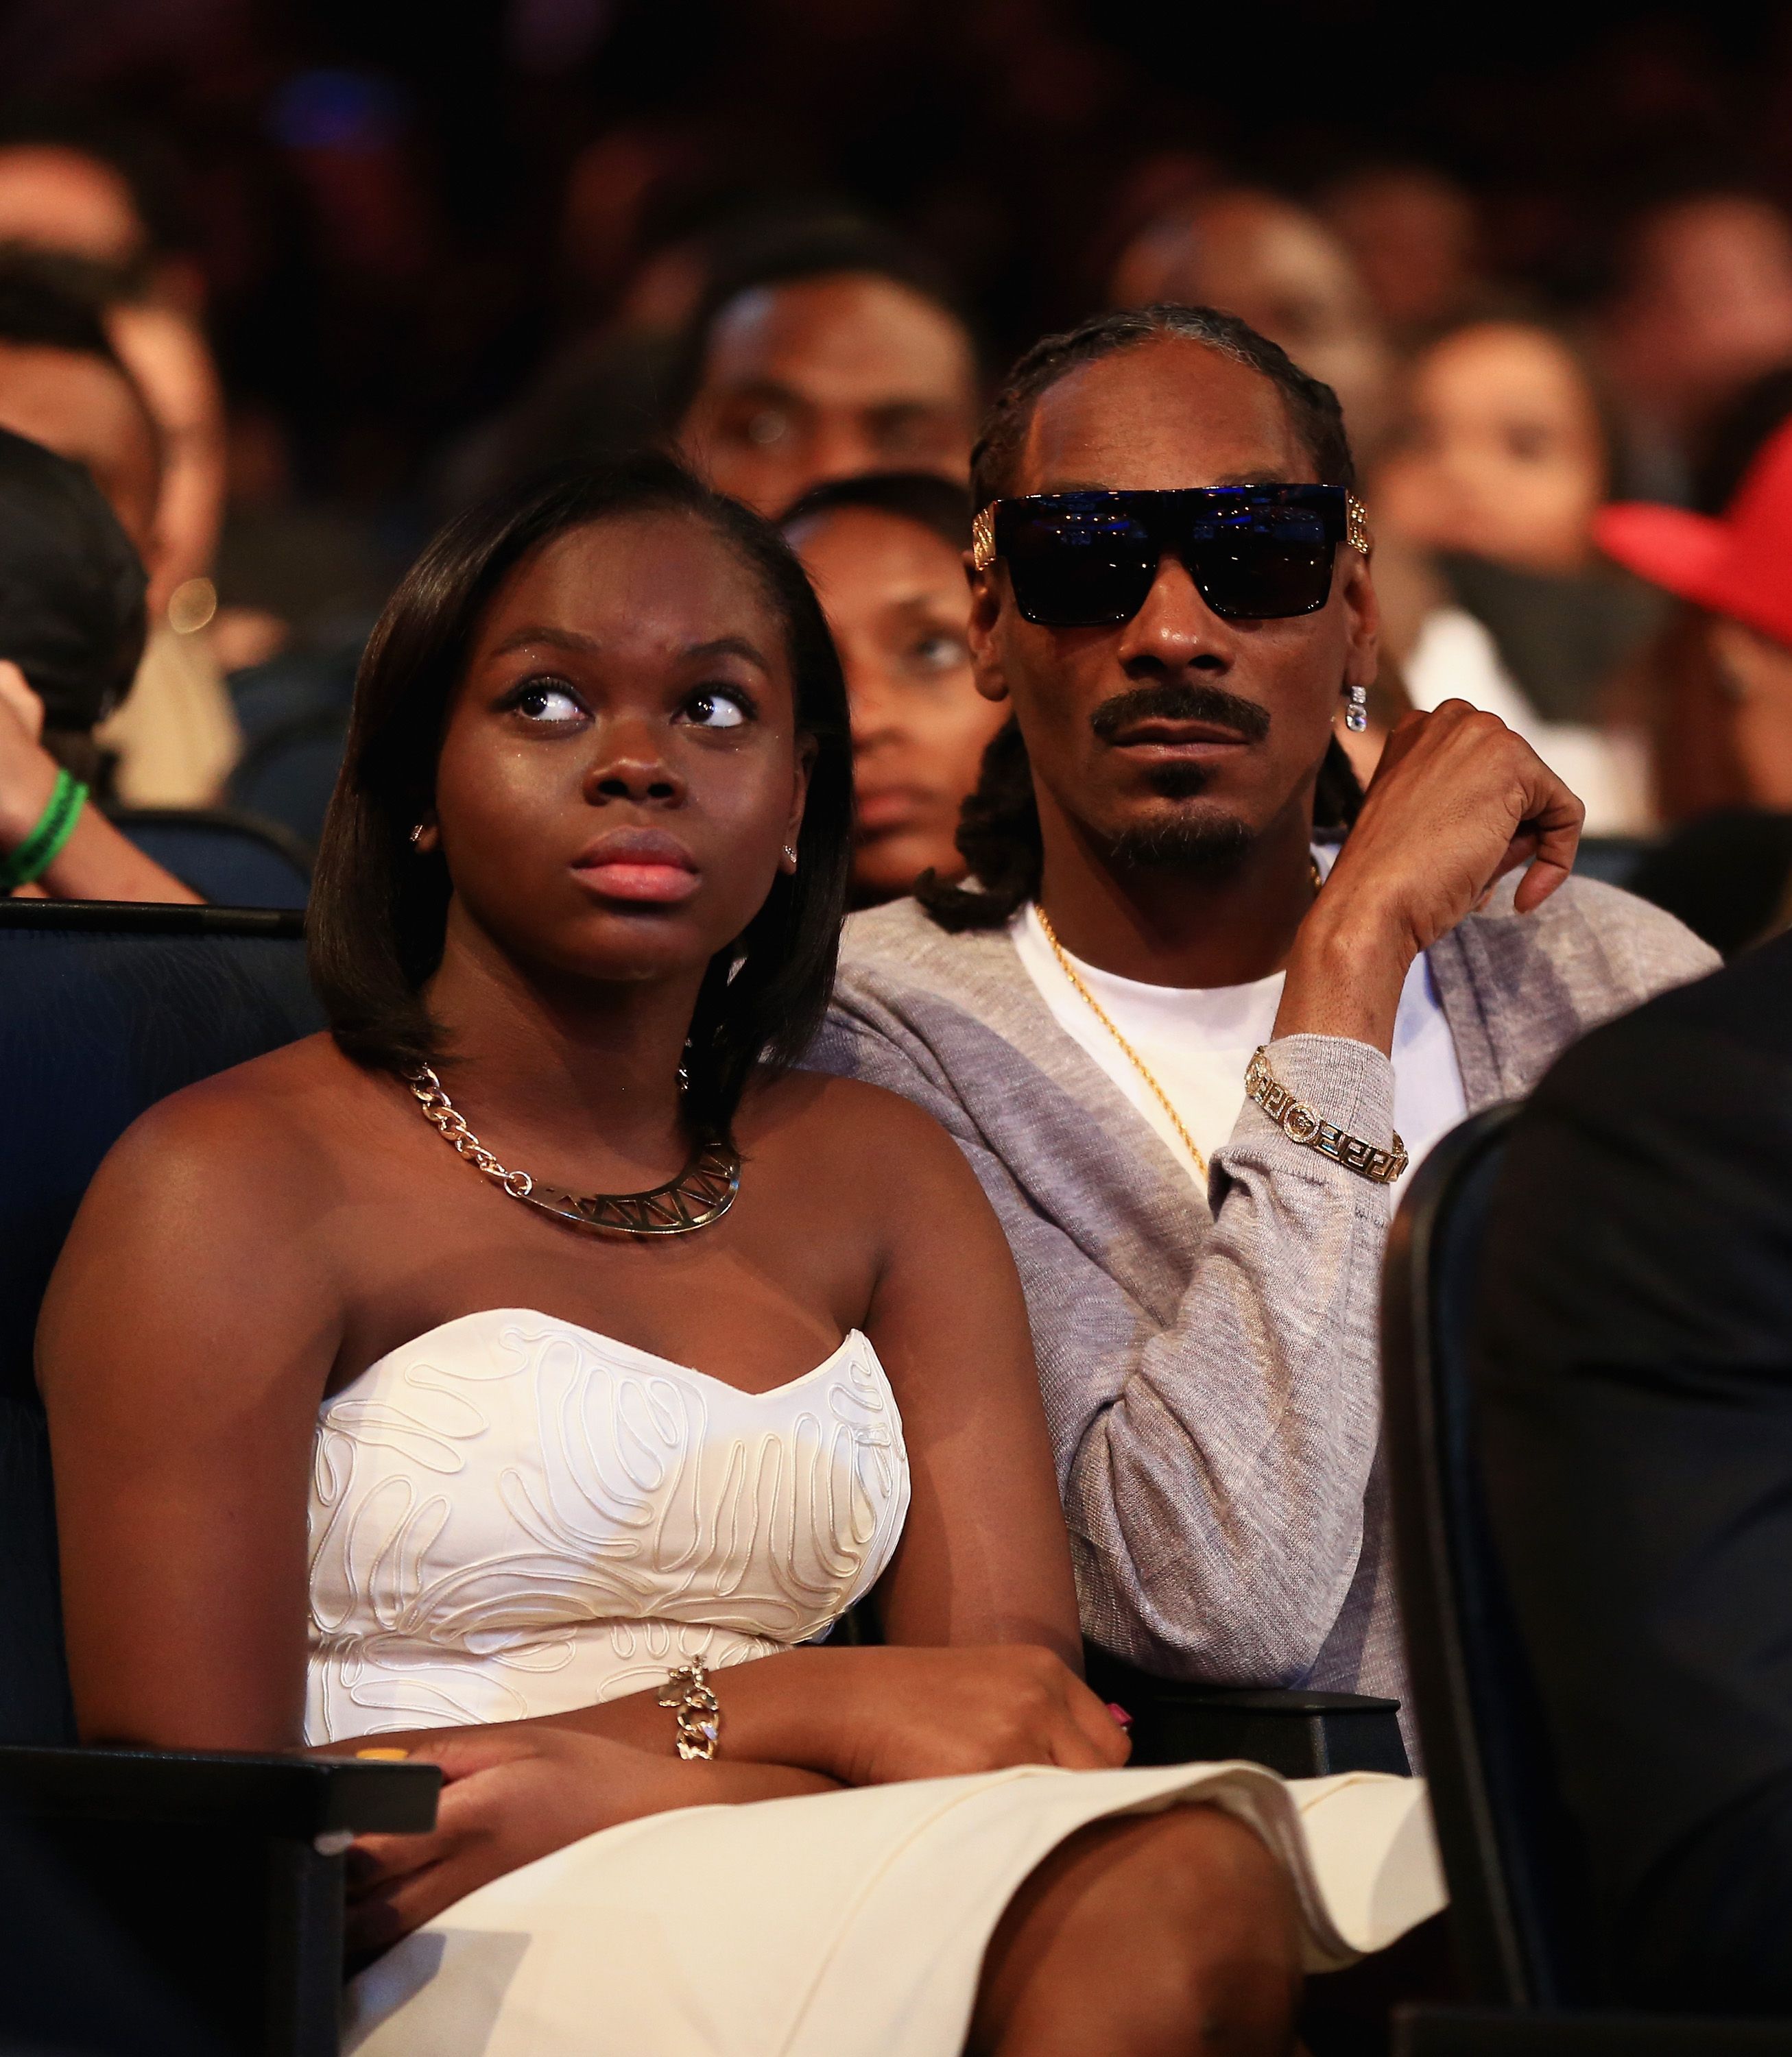 Snoop Dogg and Cori Broadus attend the BET Awards '14 at Nokia Theatre L.A. LIVE on June 29, 2014 in Los Angeles, California | Photo: Getty Images  